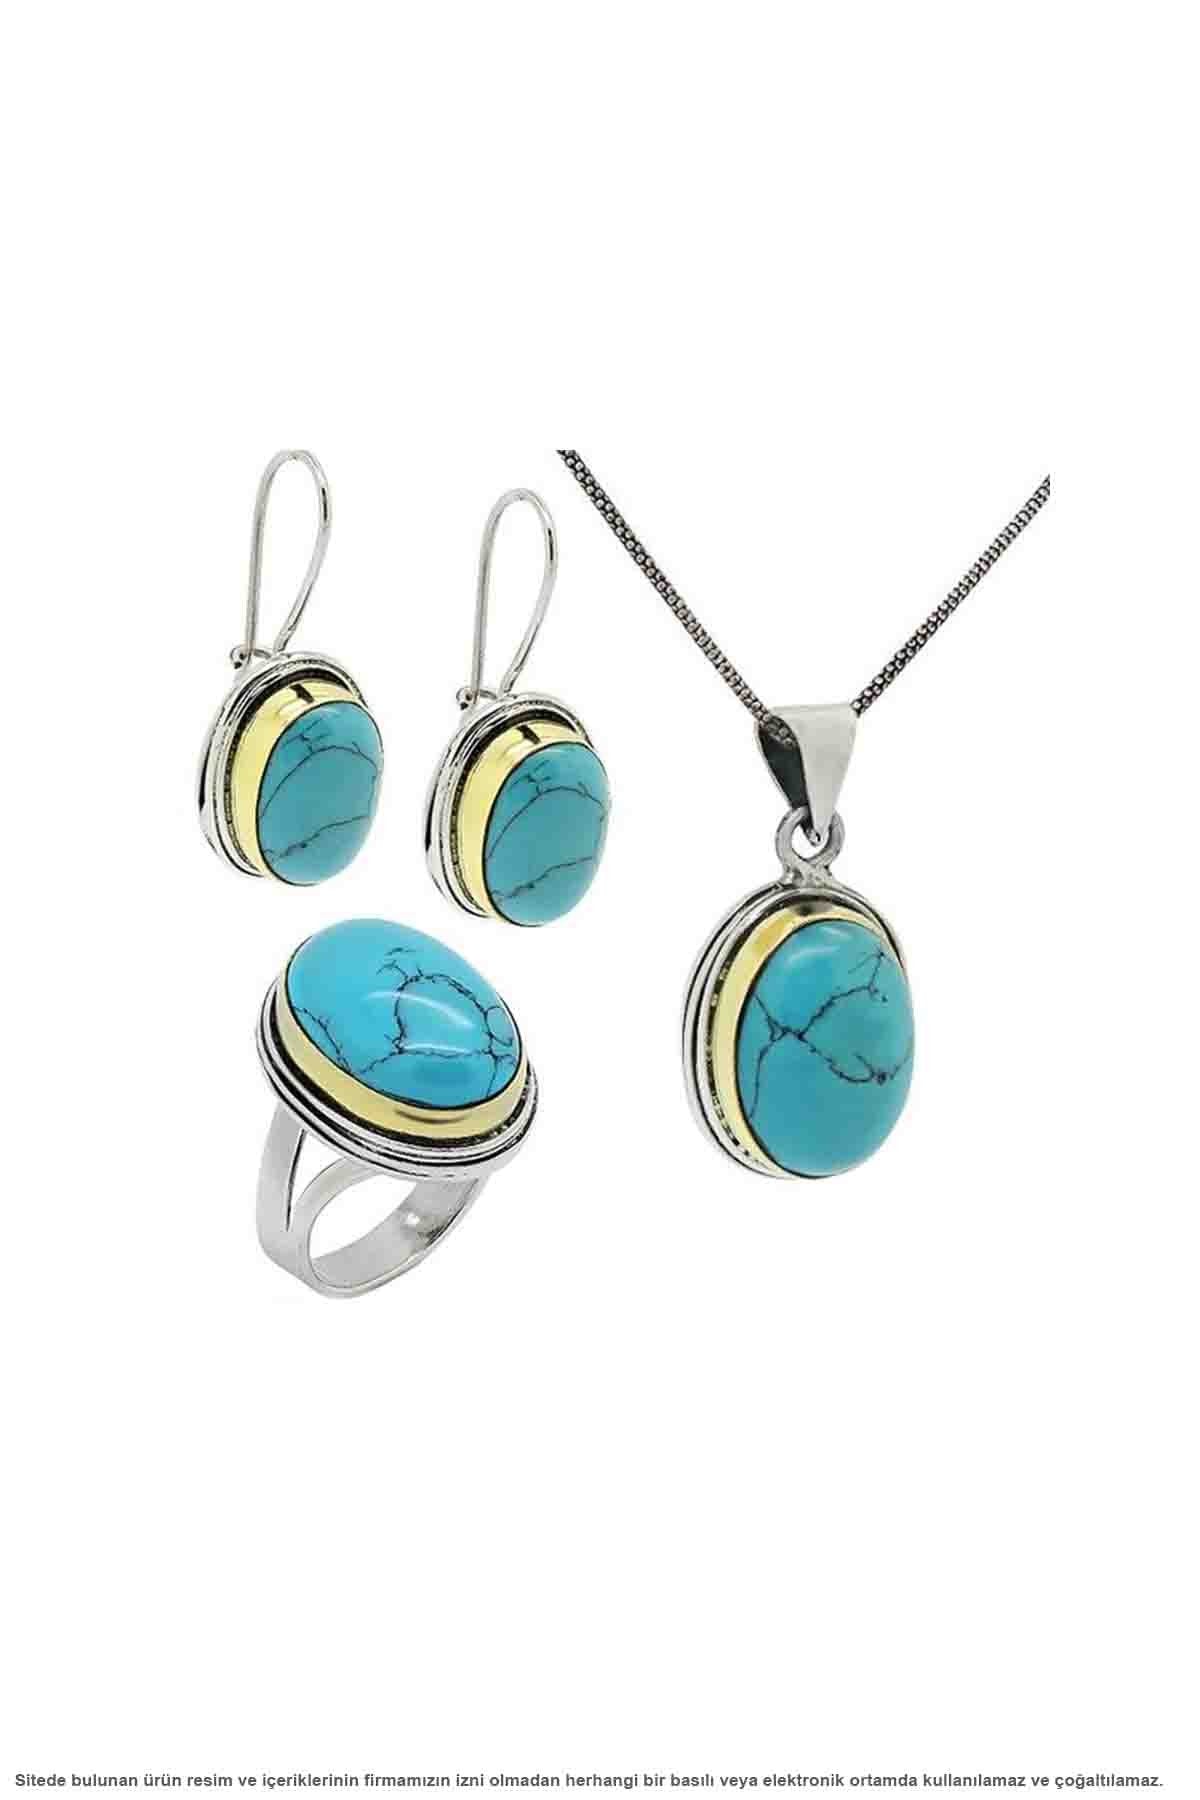 Authentic Turkish Silver Jewelry Set with Turquoise (Firuze) Stones - Exquisite Handcrafted Women's Ensemble